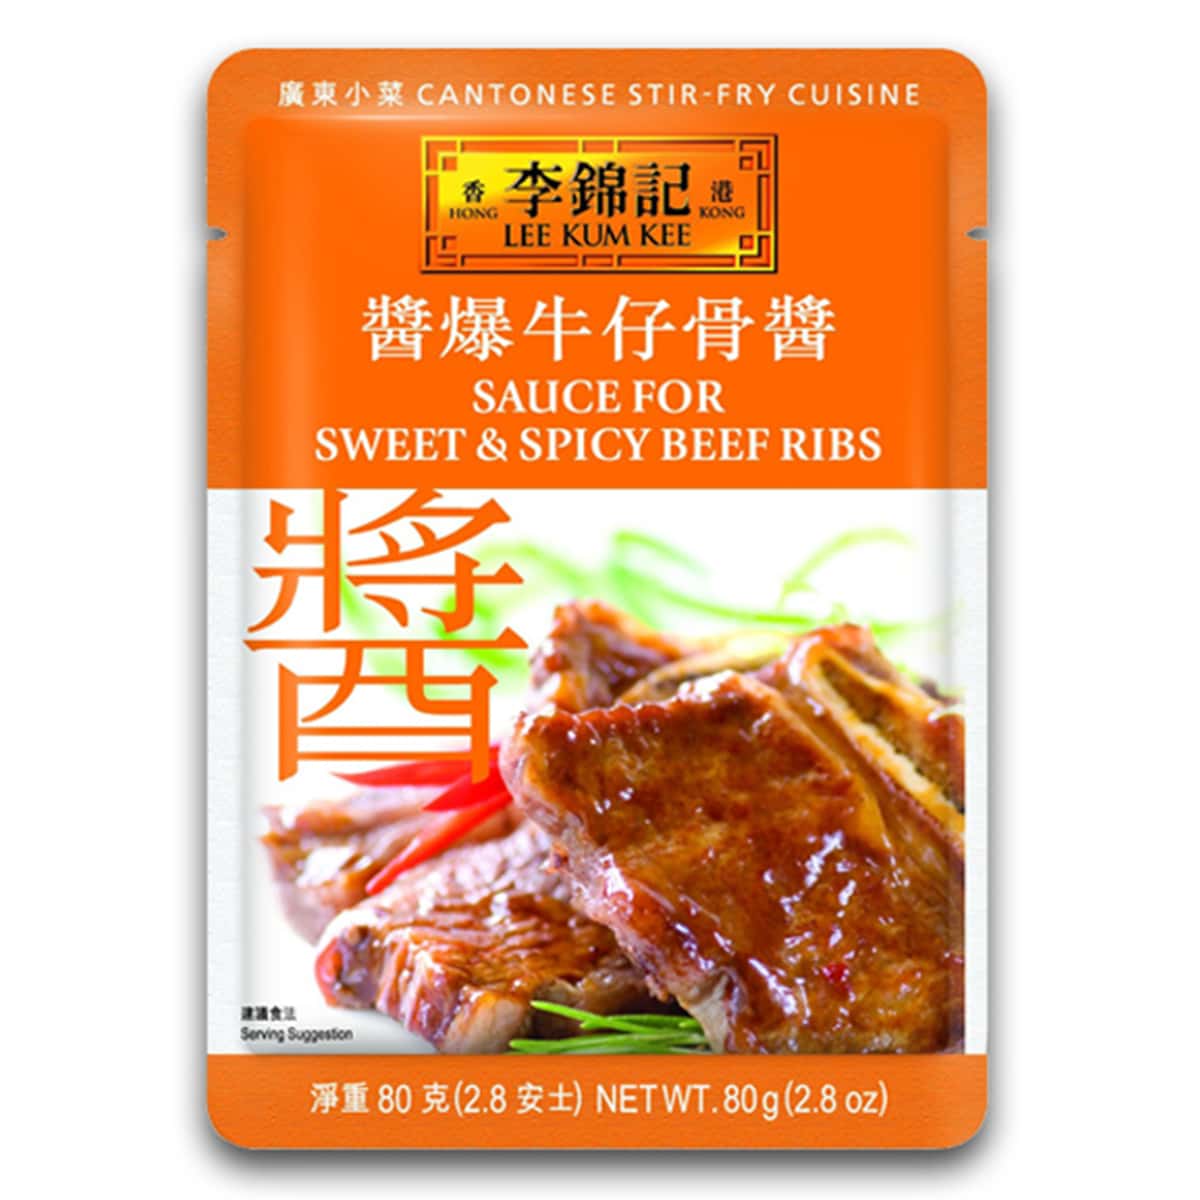 Sauce for Sweet and Spicy Beef Ribs - 80 gm